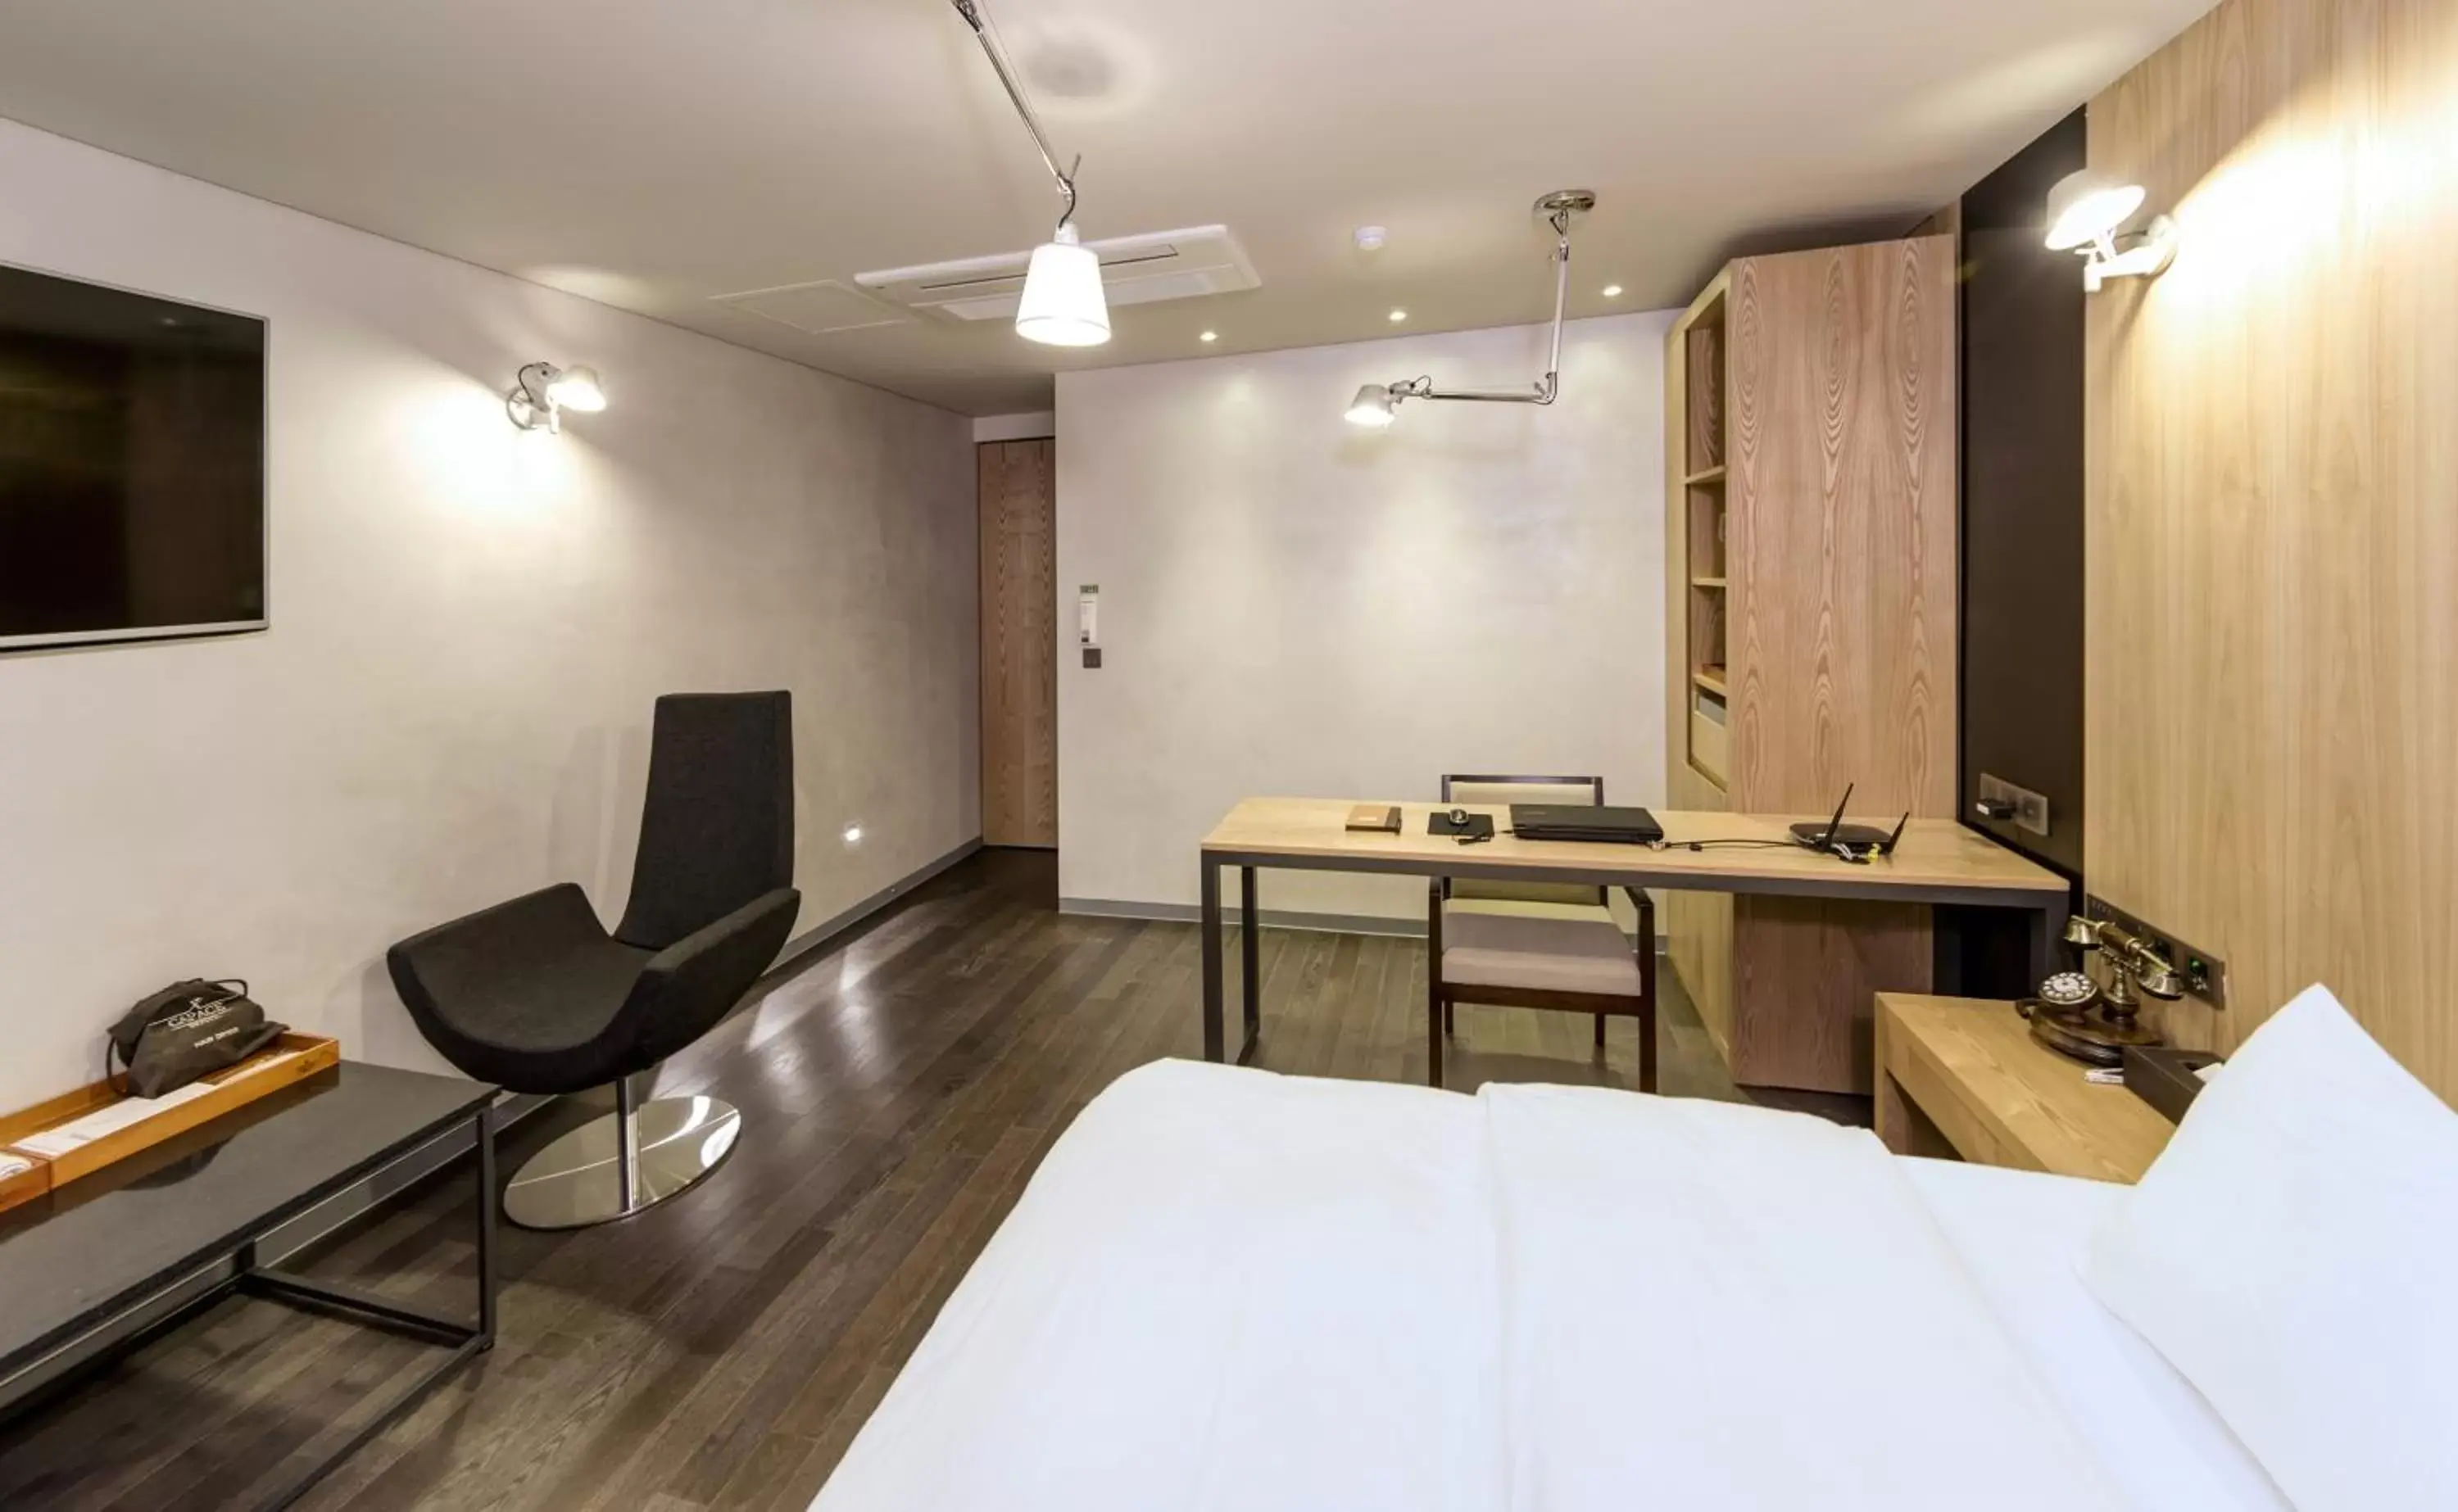 Area and facilities, Room Photo in Capace Hotel Gangnam